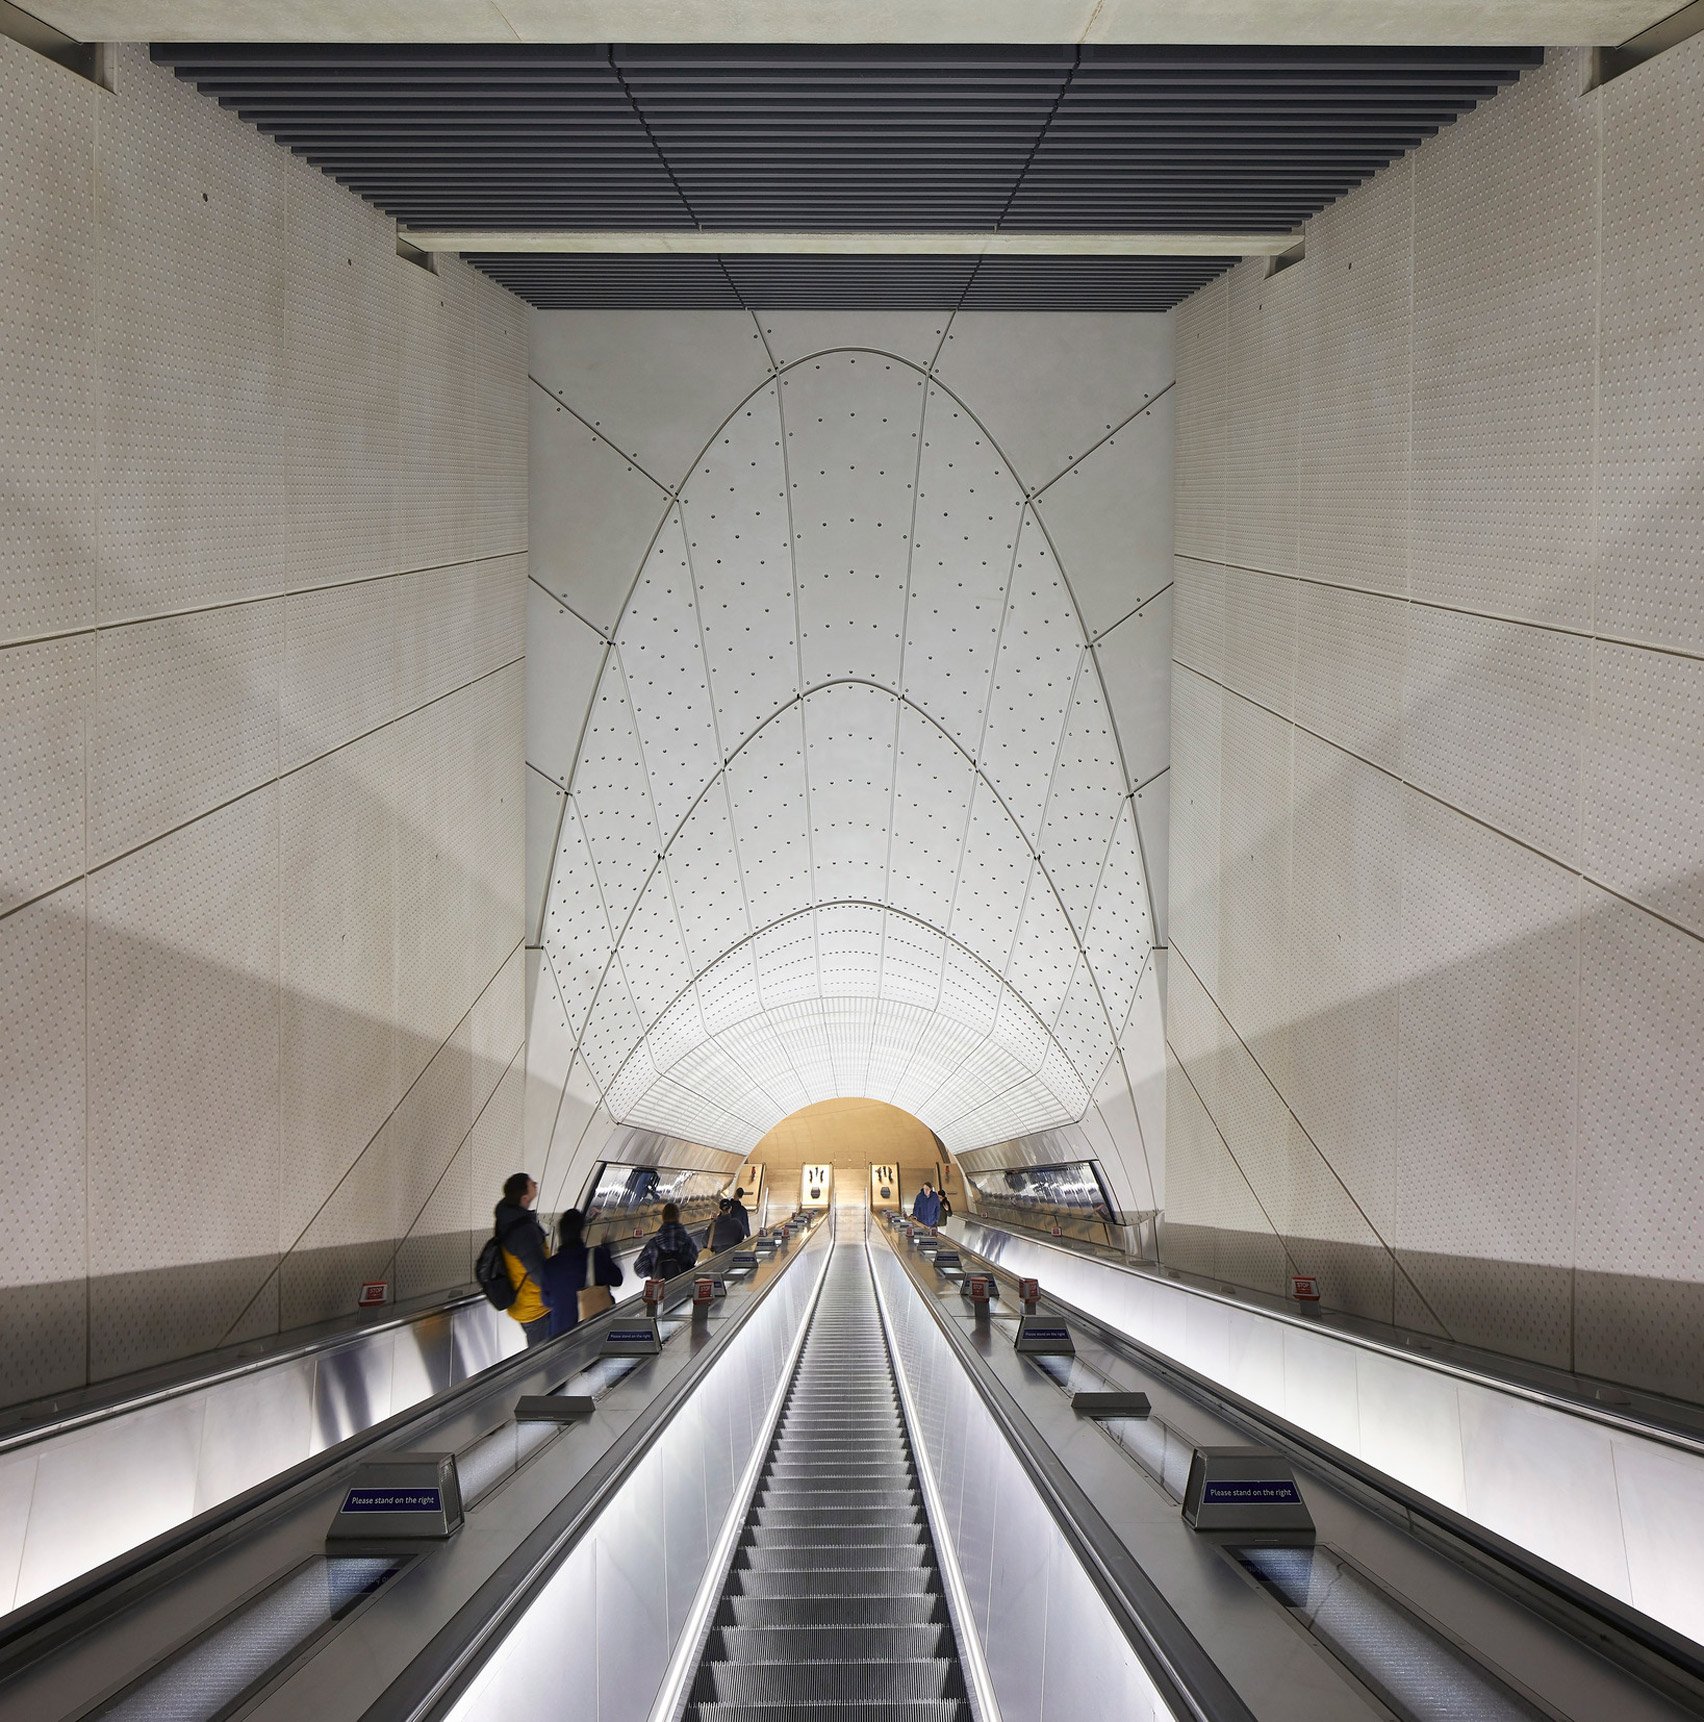 The Elizabeth Line interior, which has been shortlisted for the Stirling Prize